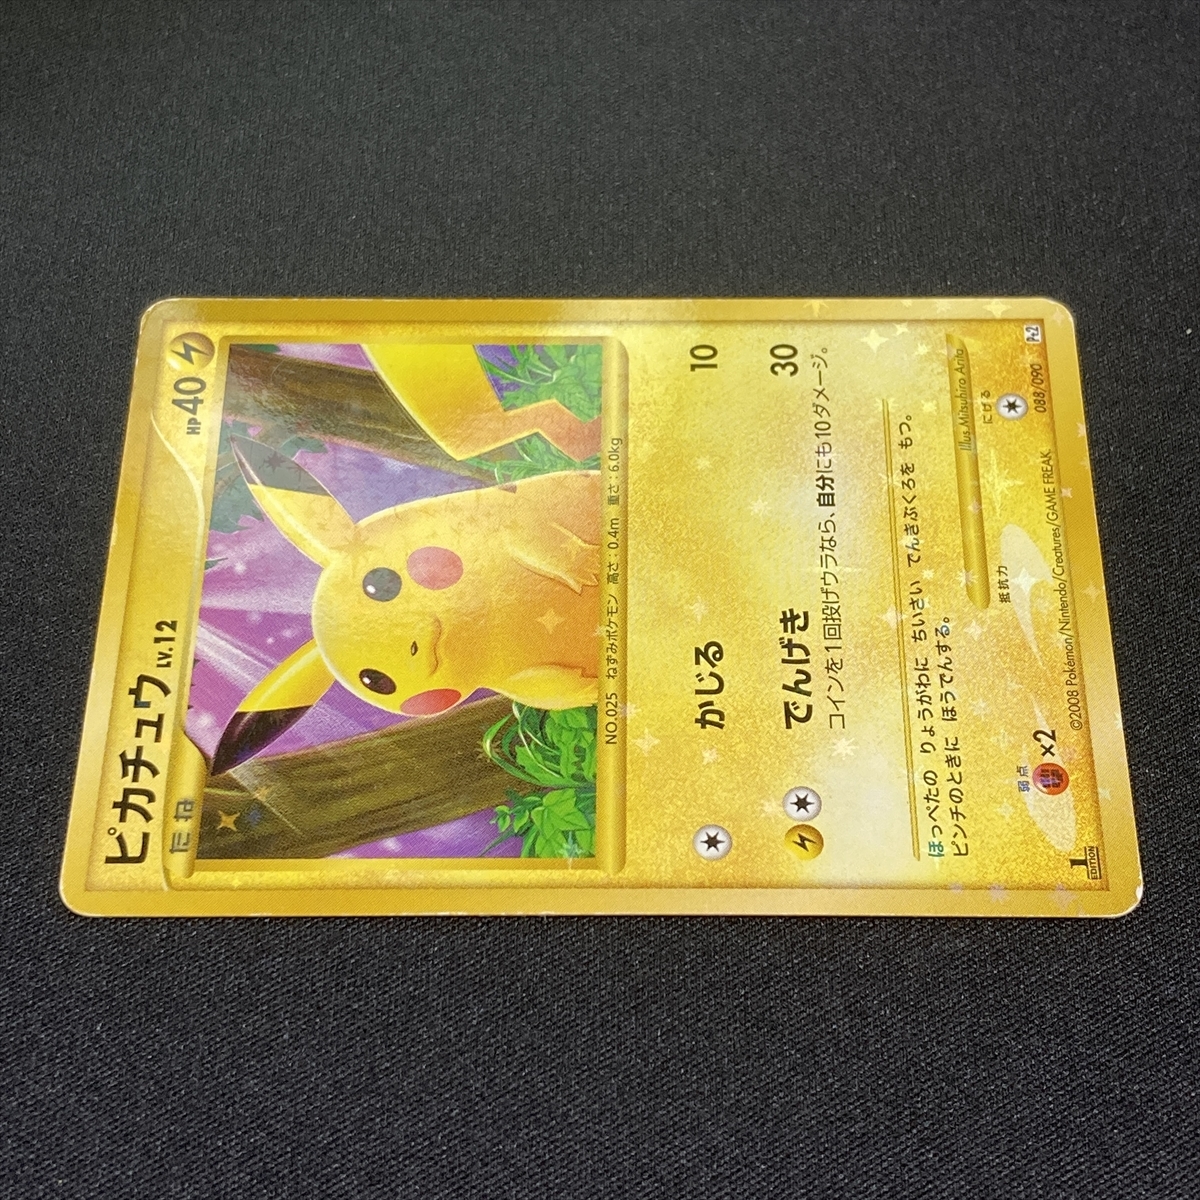 Details about   Pikachu 088/090 Very Rare 2008 Pokemon Card Japan Free Shipping F/S 